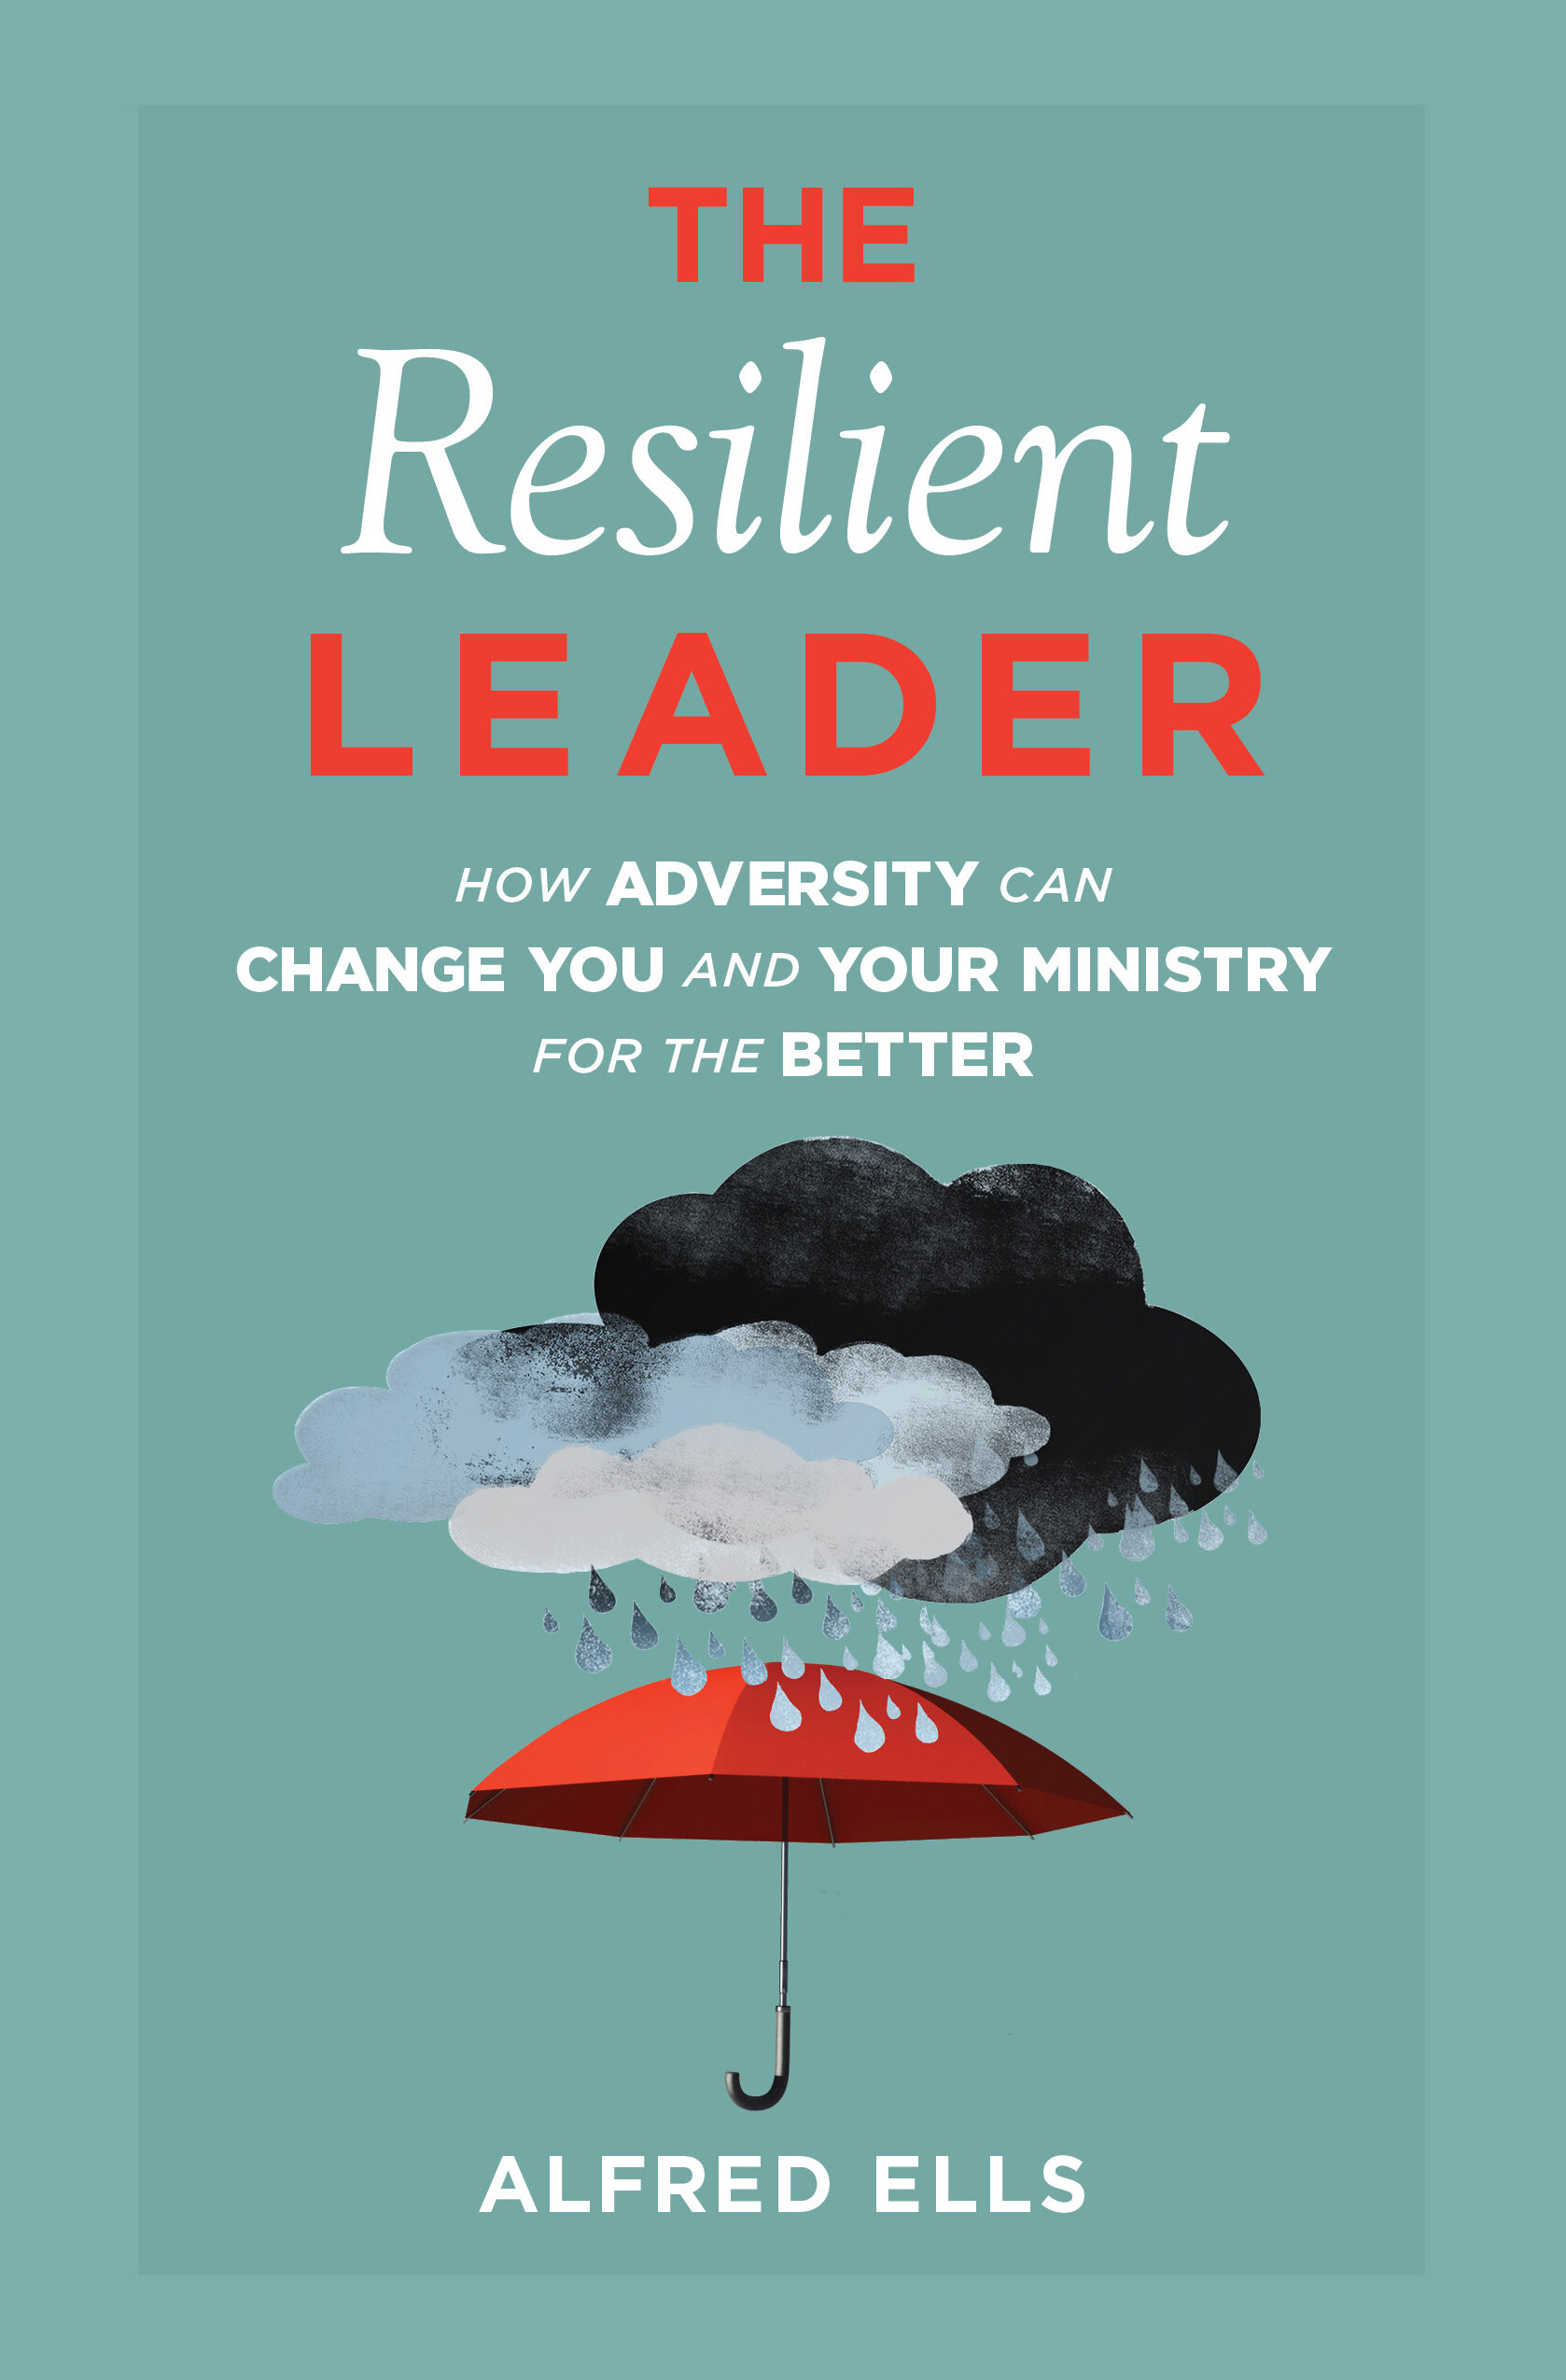 The Resilient Leader: How Adversity Can Change You and Your Ministry for the Better